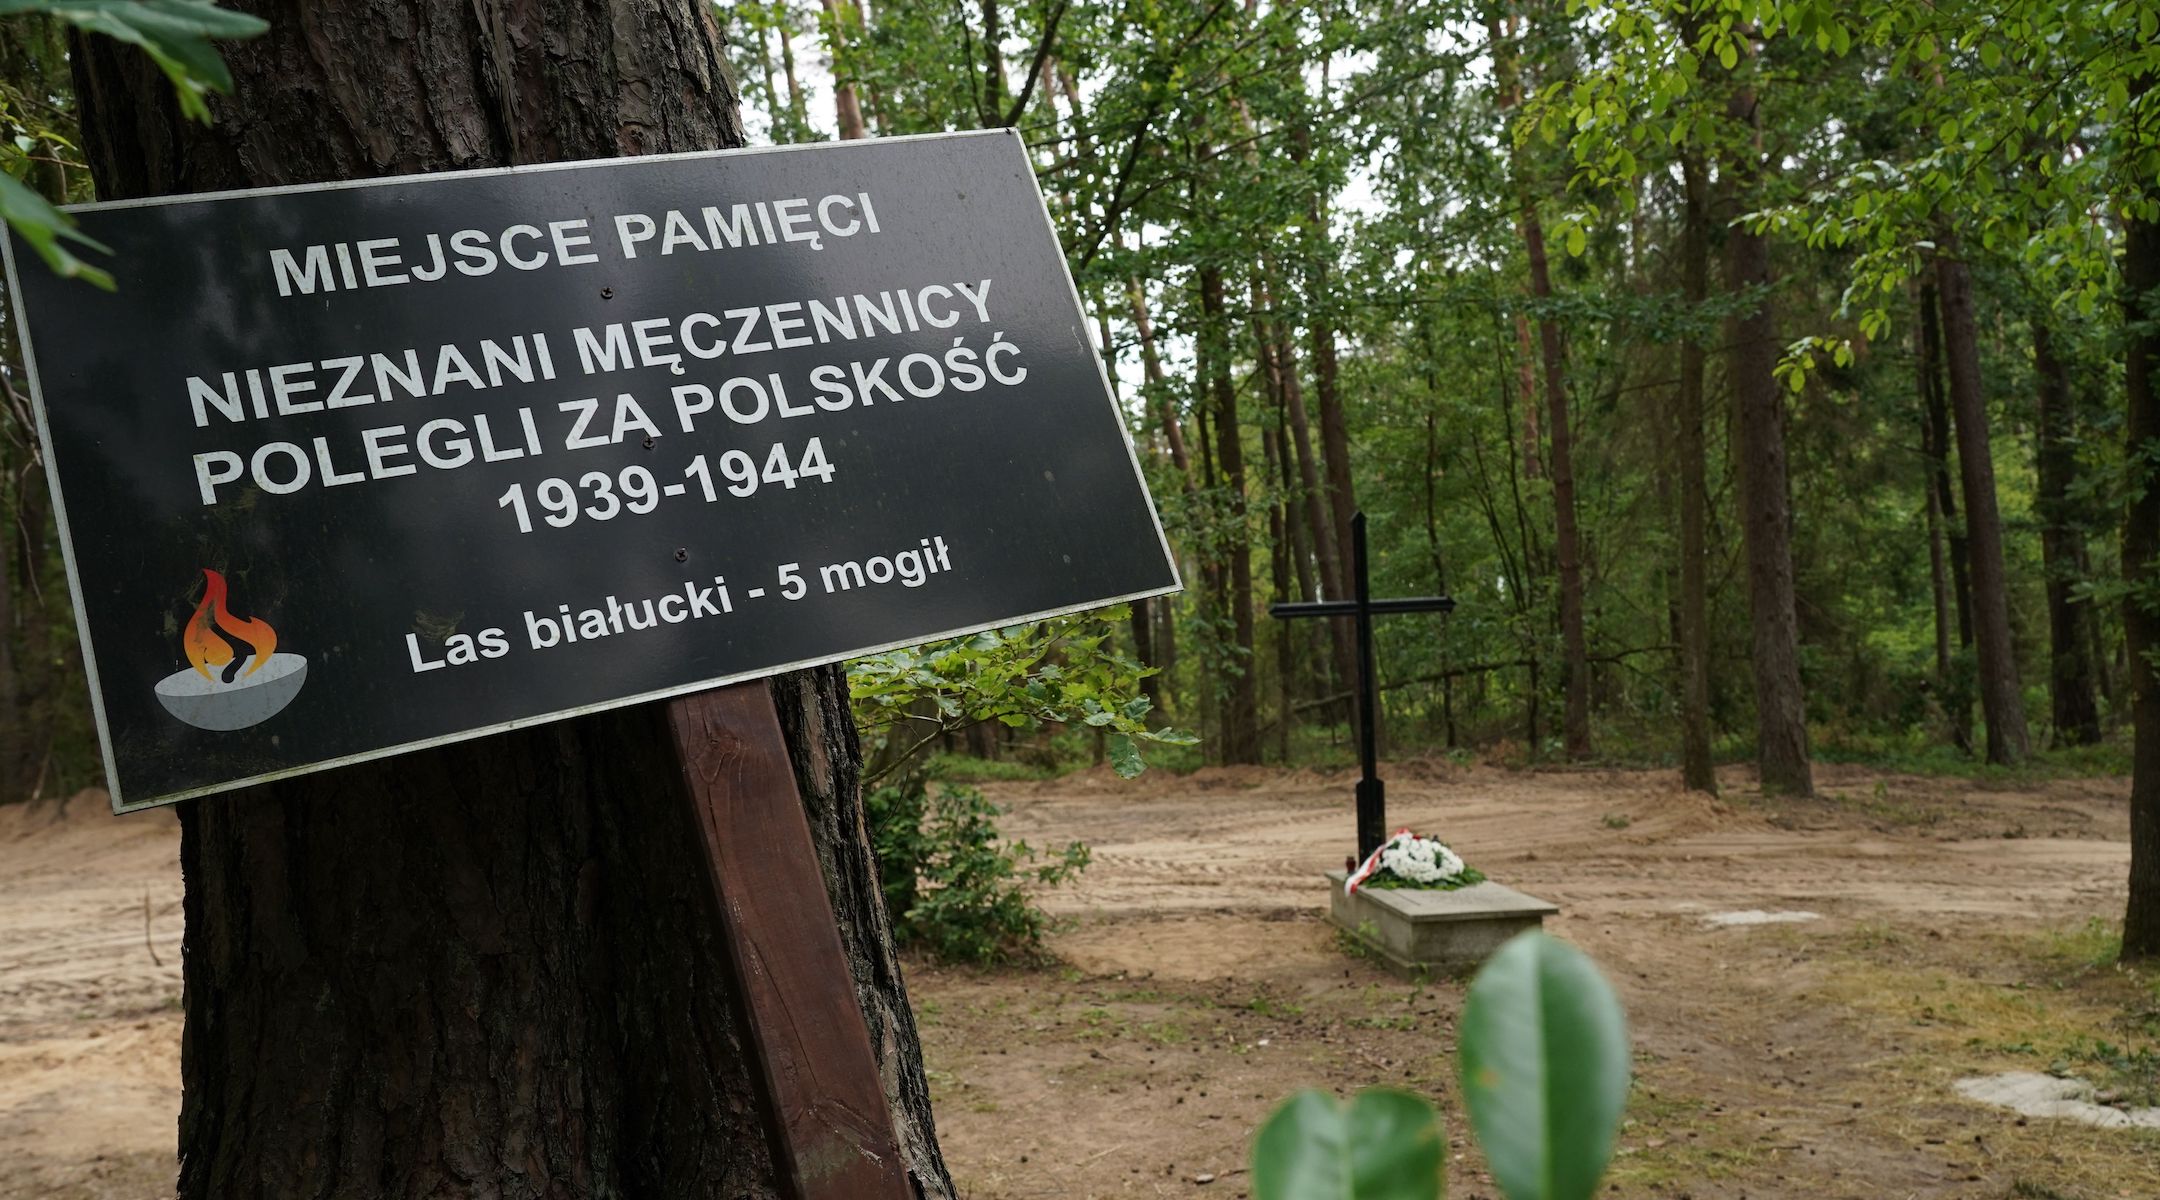 A symbolic grave outside the town of Działdowo, Poland, where a mass grave of about 8,000 Geman Nazi victims from the nearby Soldau concentration camp was unearthed at the beginning of July 2022. (Janek Skarzynski/AFP via Getty Images)